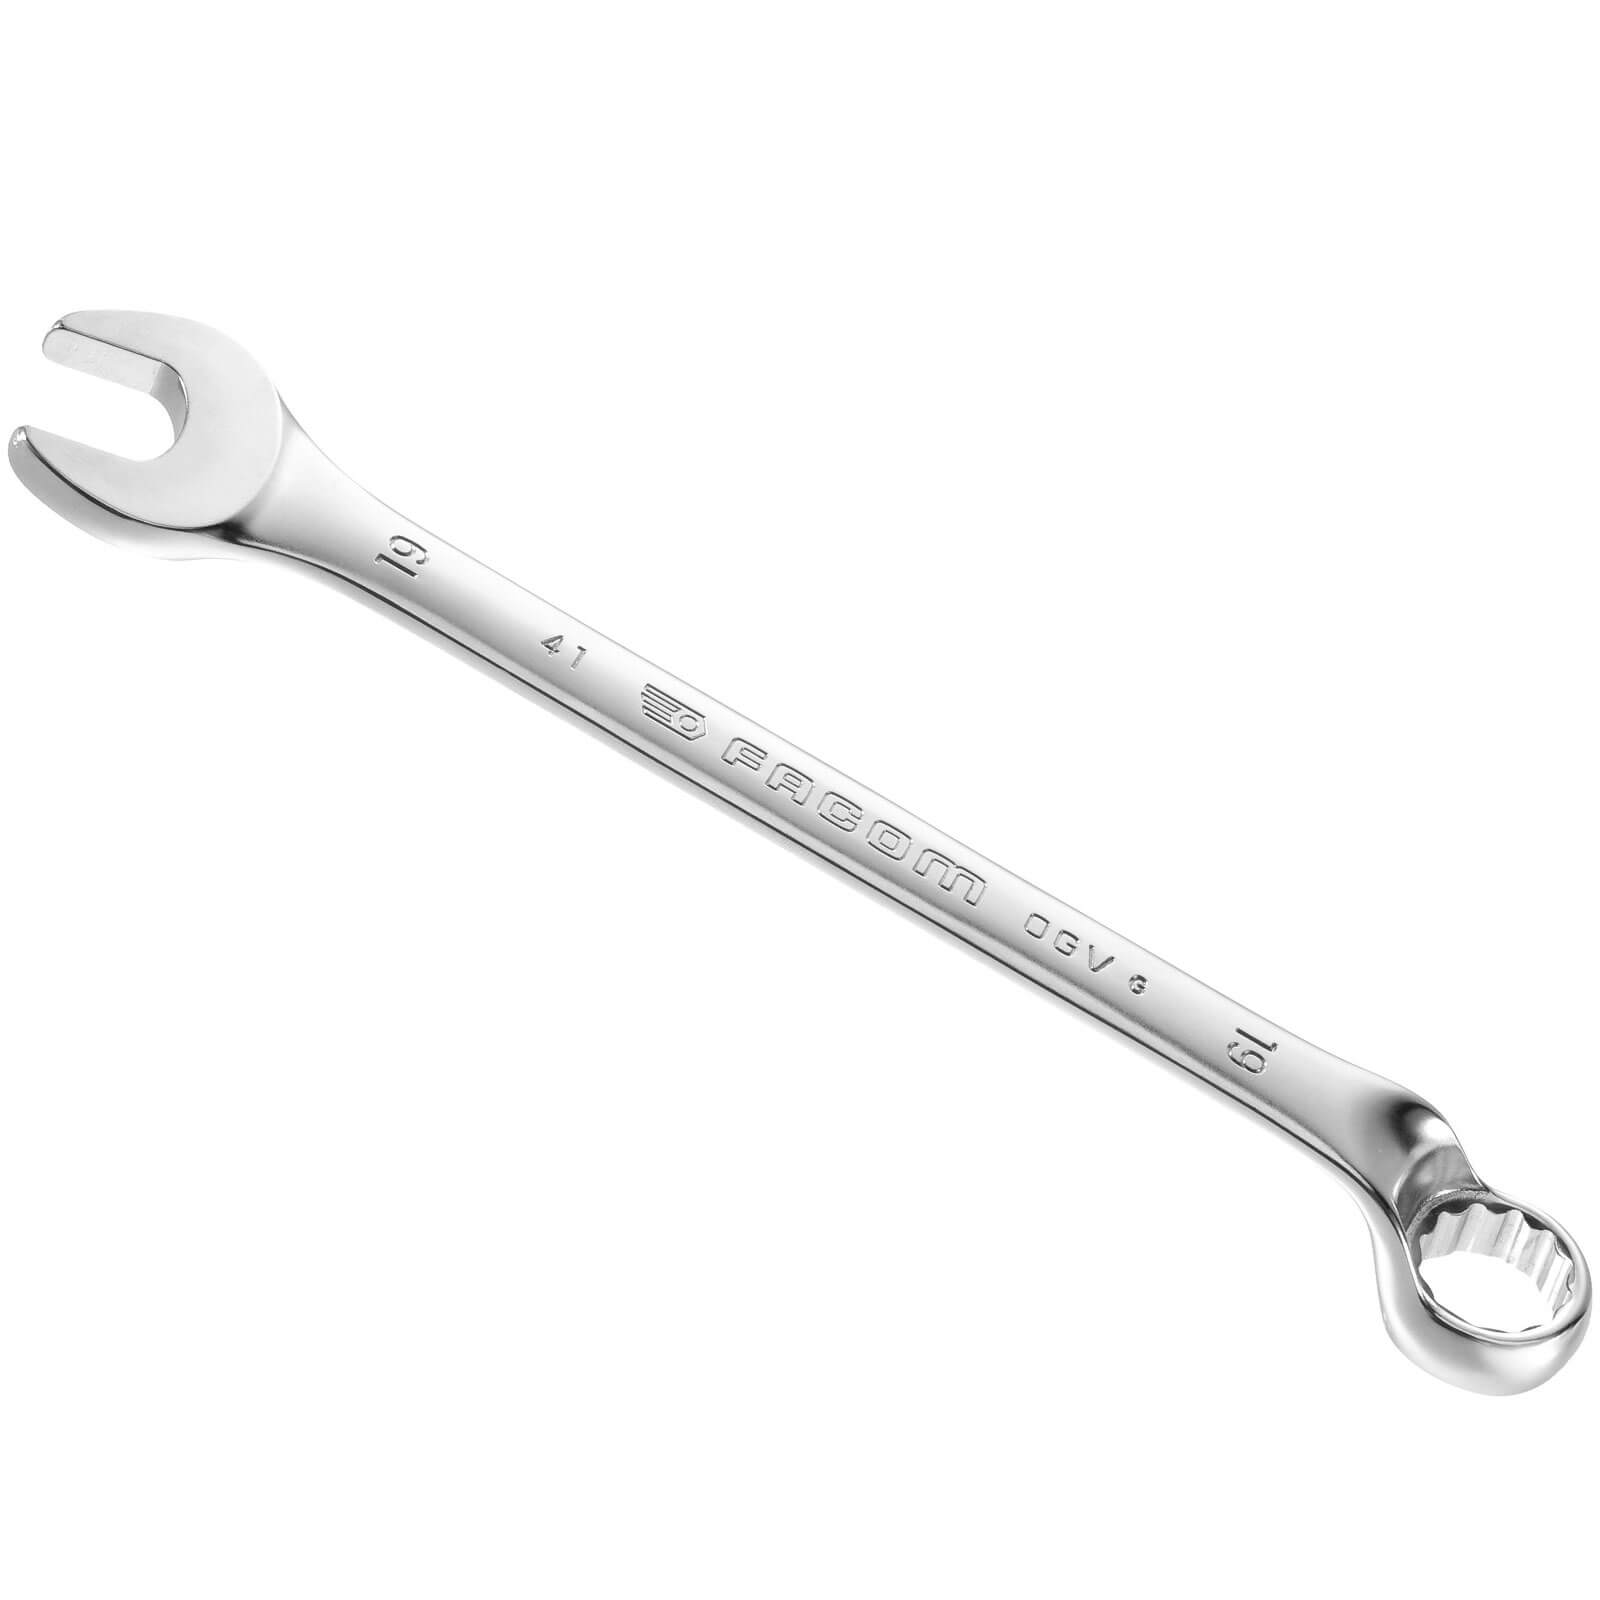 Photo of Facom 41 Series Offset Combination Spanner Metric 32mm